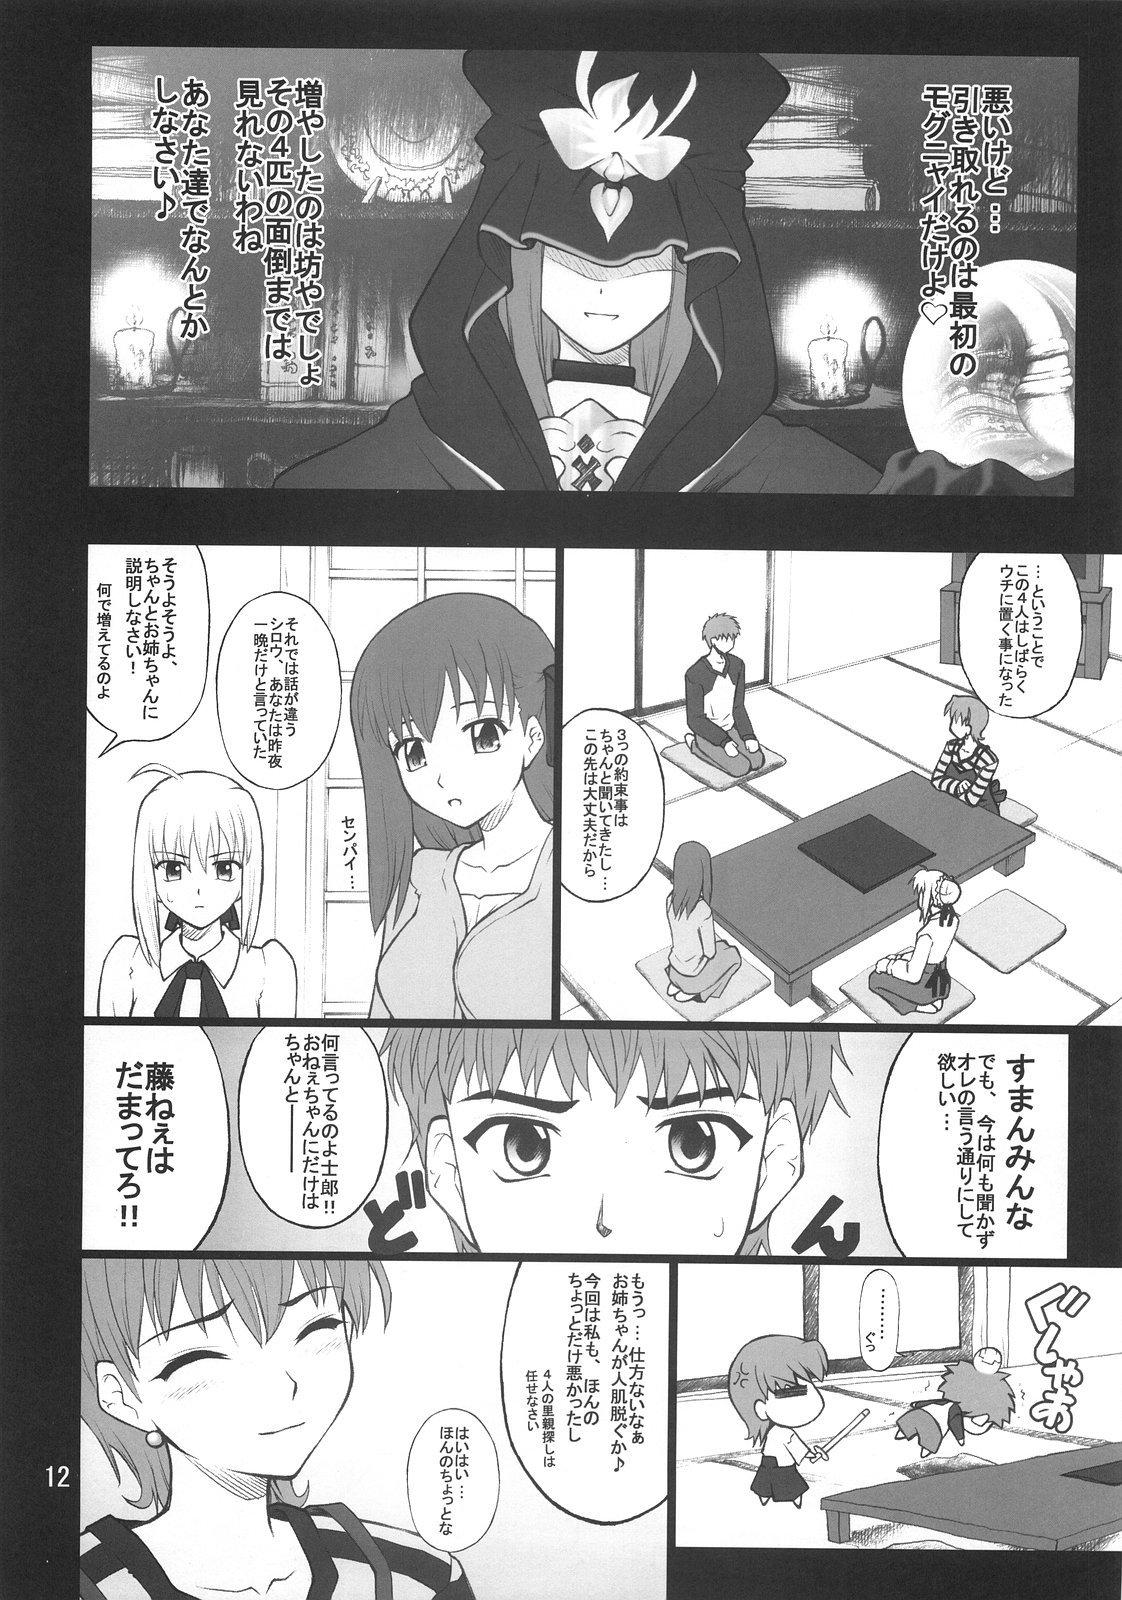 Chubby Grem-Rin 2 - Fate stay night Fate hollow ataraxia Amazing - Page 11